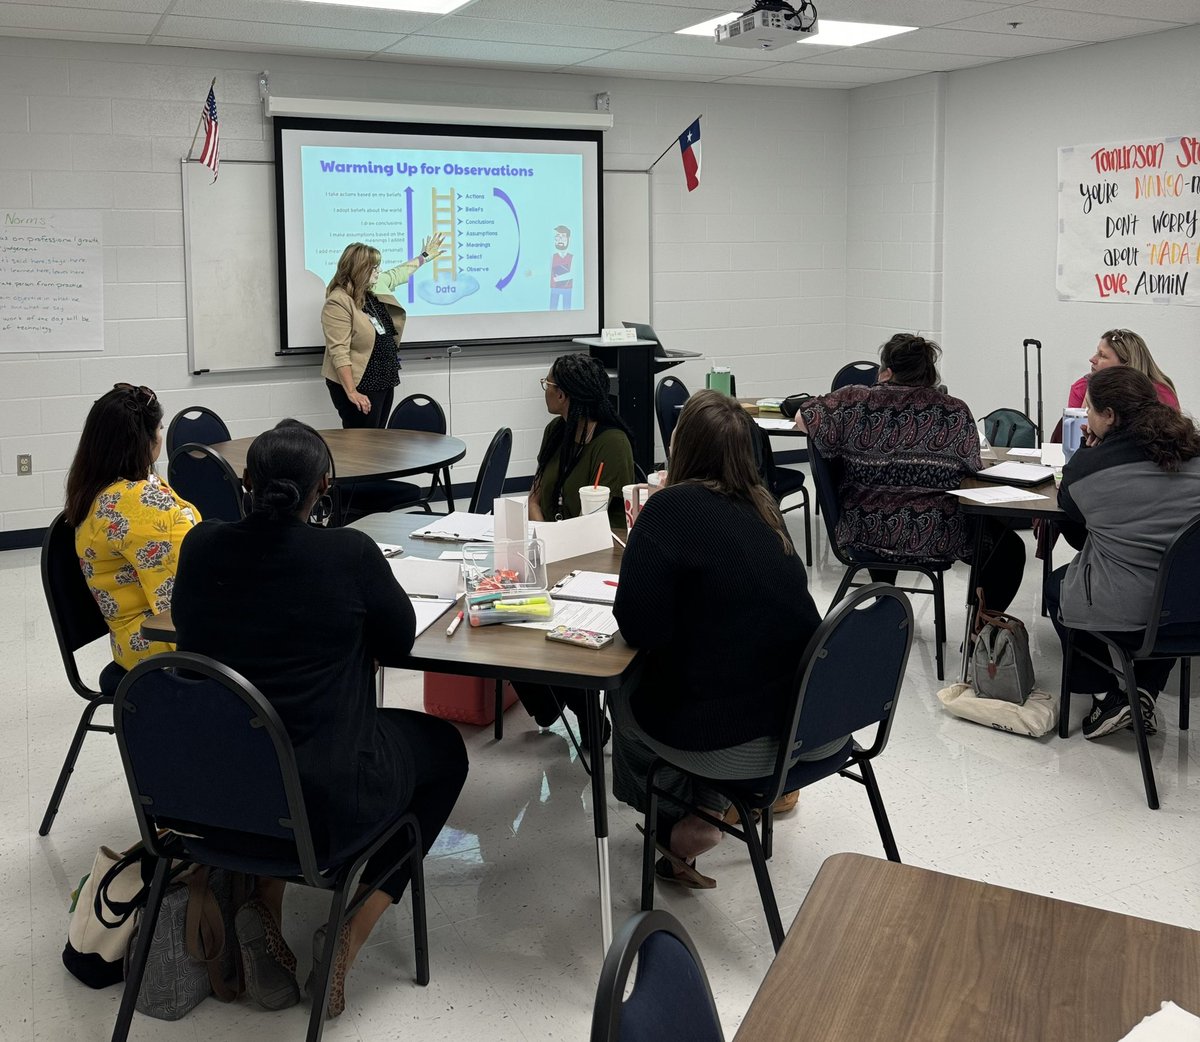 Today was a great day of professional learning! Tomlinson teachers participated in their second session of Instructional Rounds. #TeamNorthside #Trailblazers #BlazeTheWay